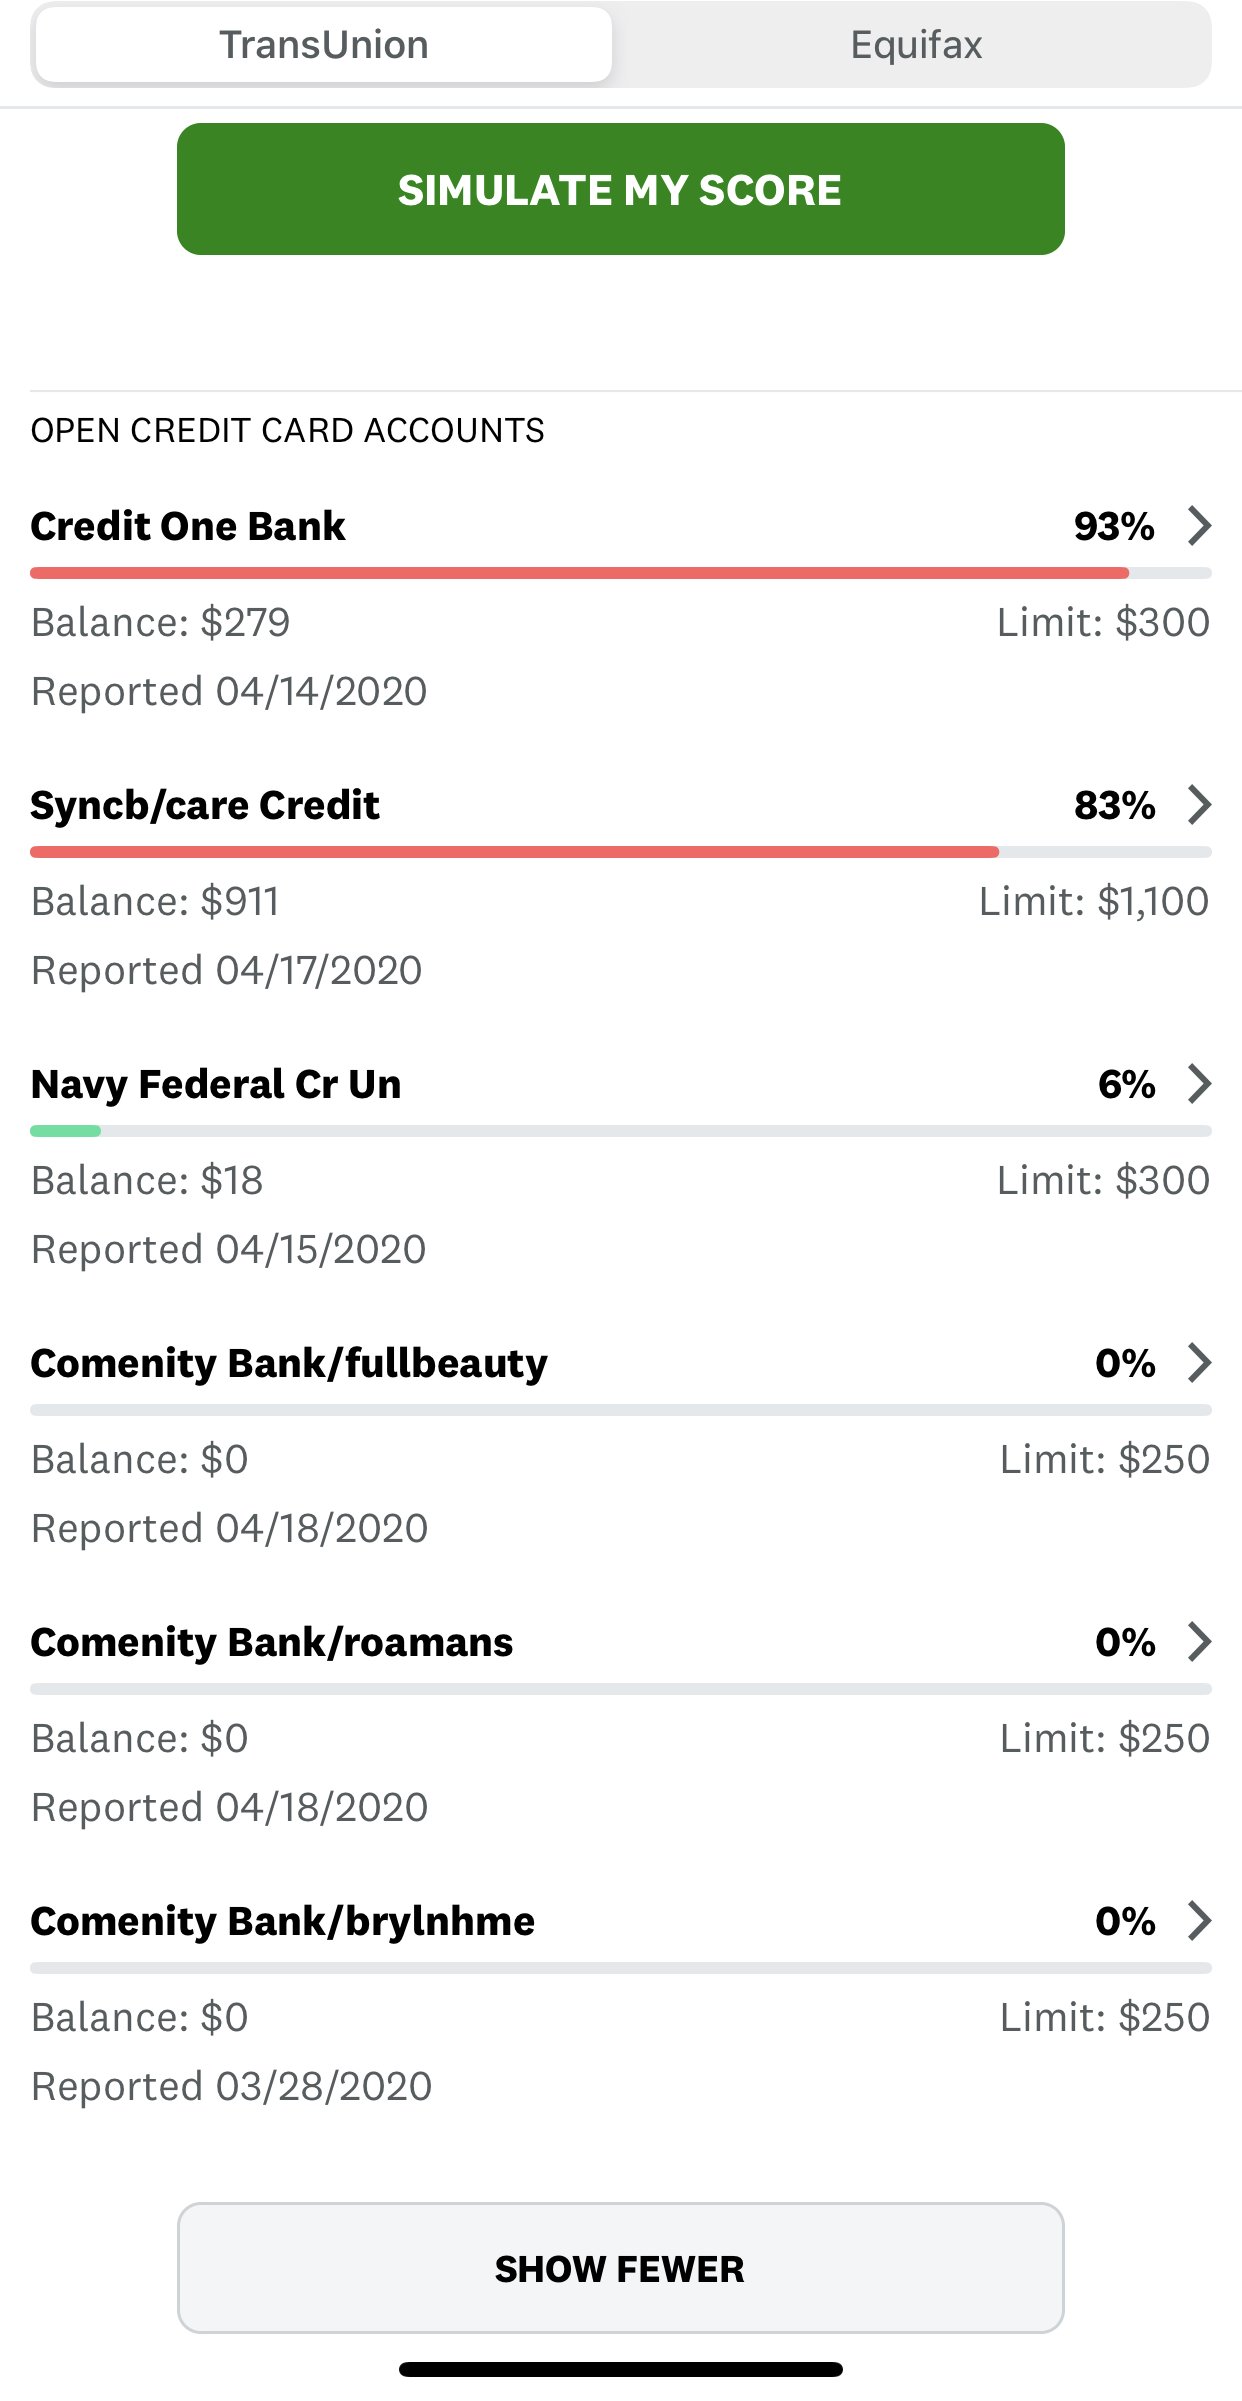 Does credit report update each time I make a payme...